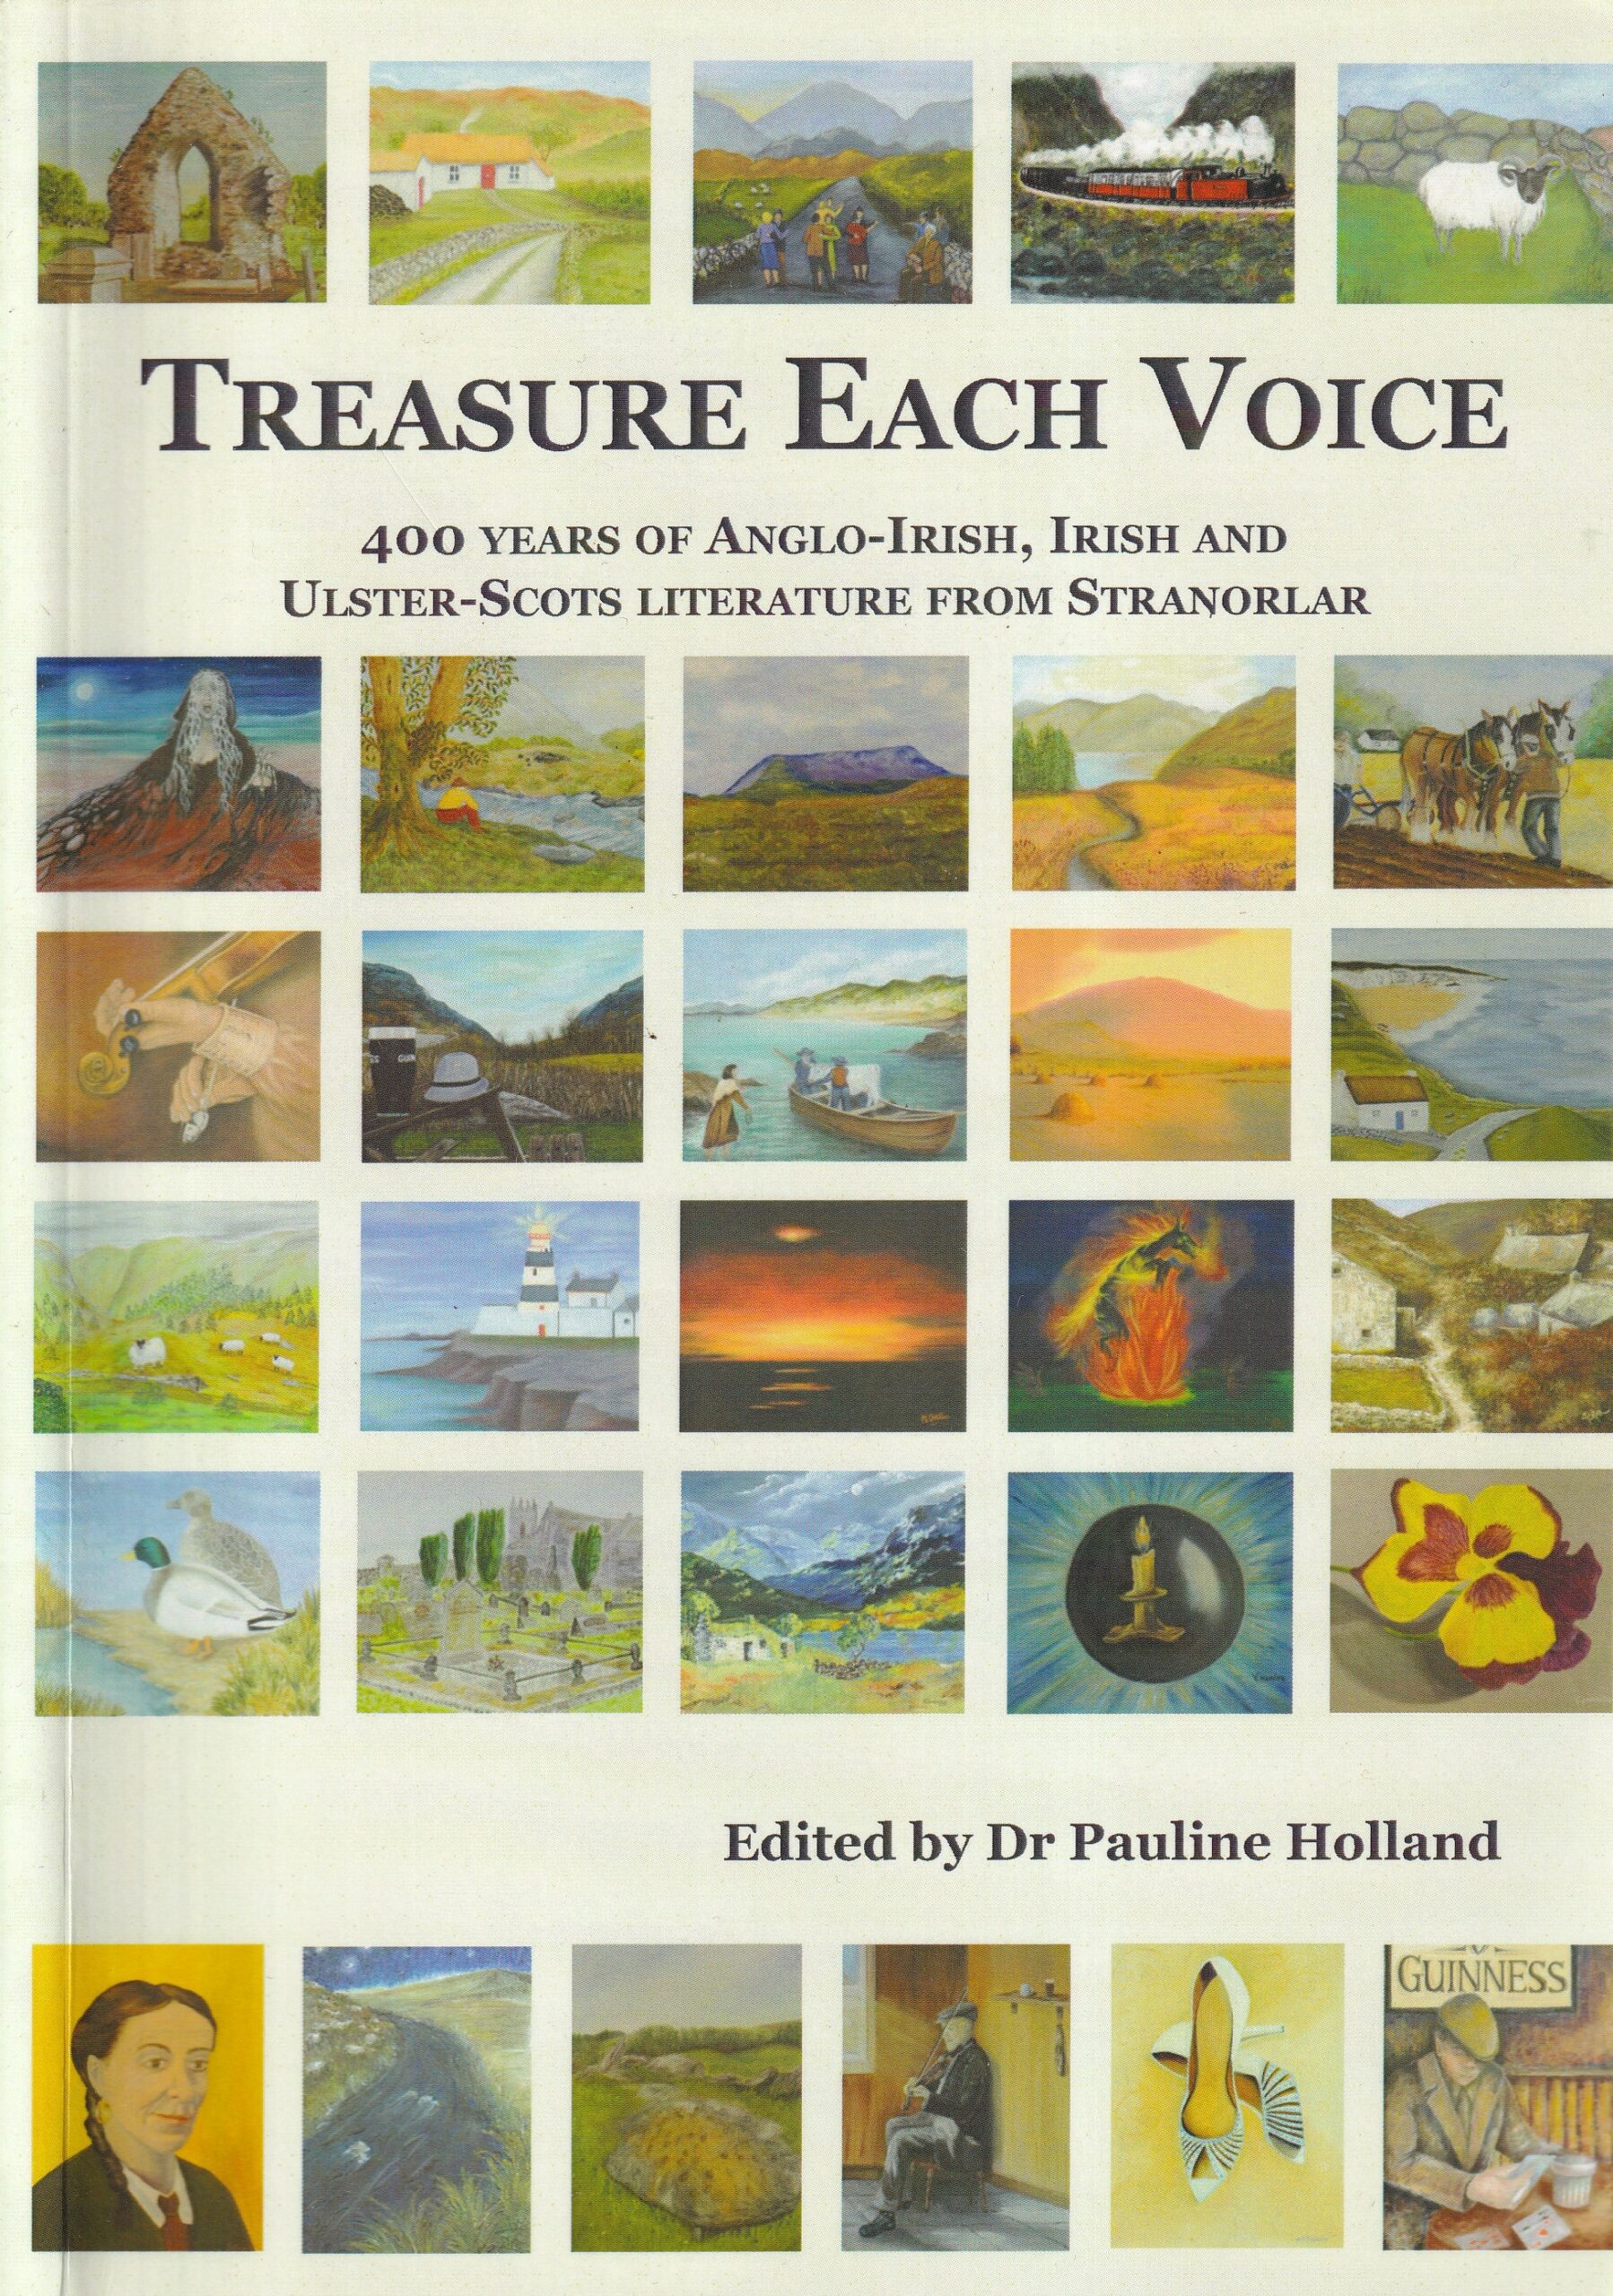 Treasure Each Voice: 400 Years of Anglo- Irish, Irish and Ulster- Scots Literature from Stranorlar by Dr Pauline Holland (ed.)